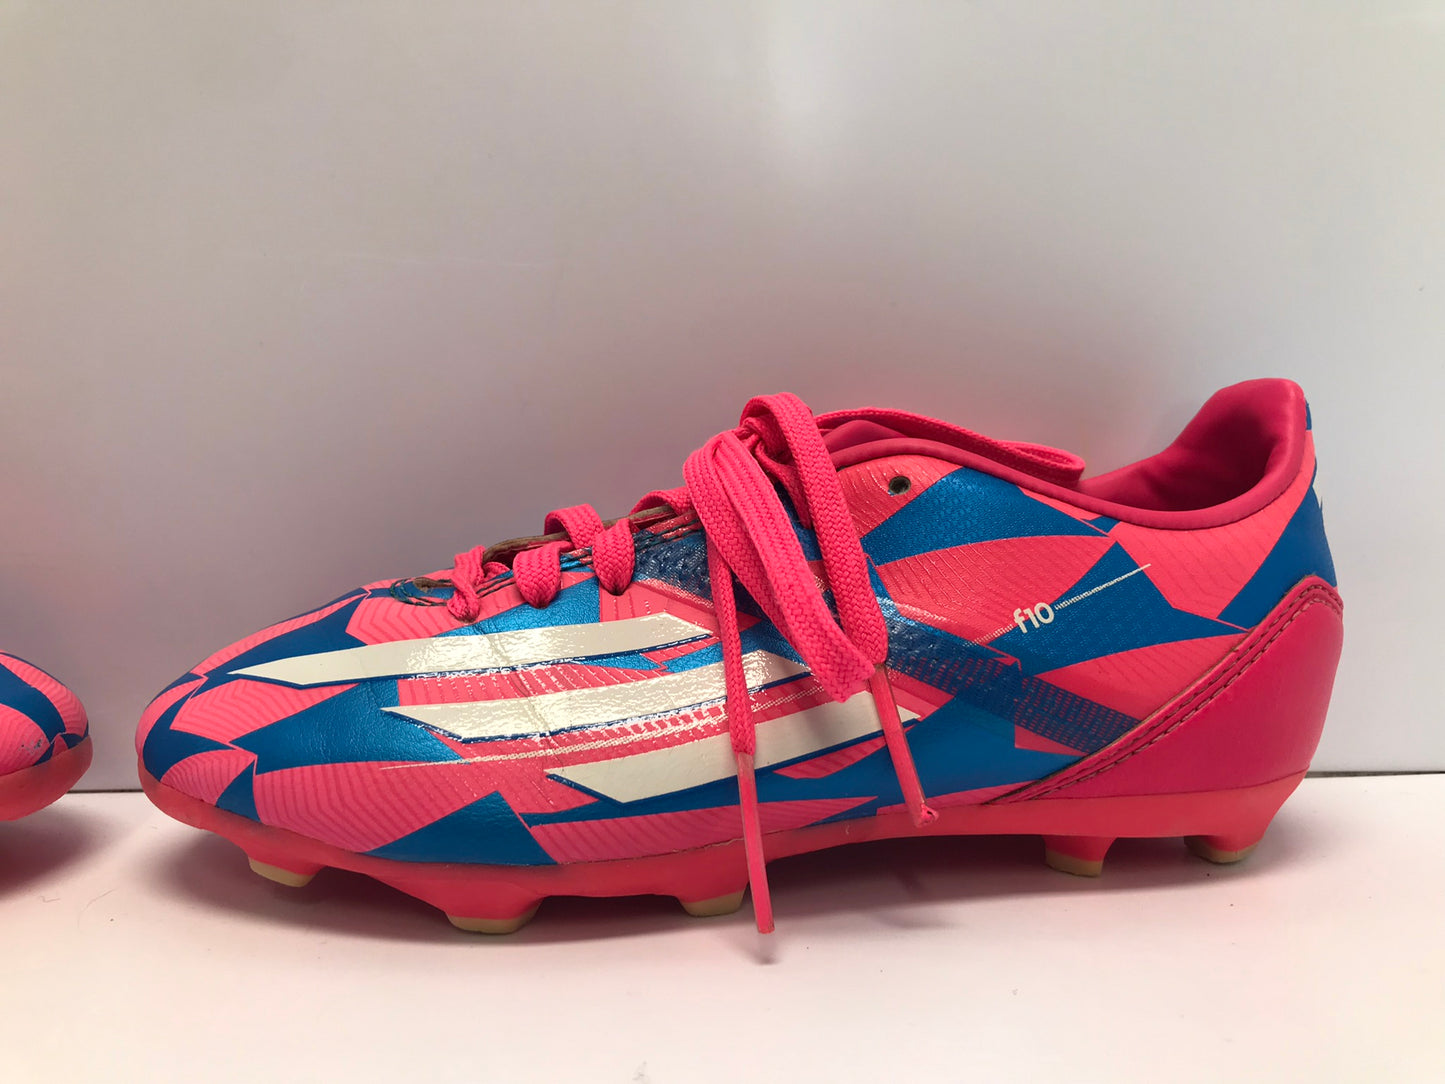 Soccer Shoes Cleats Child Size 1 Adidas Pink Blue Excellent